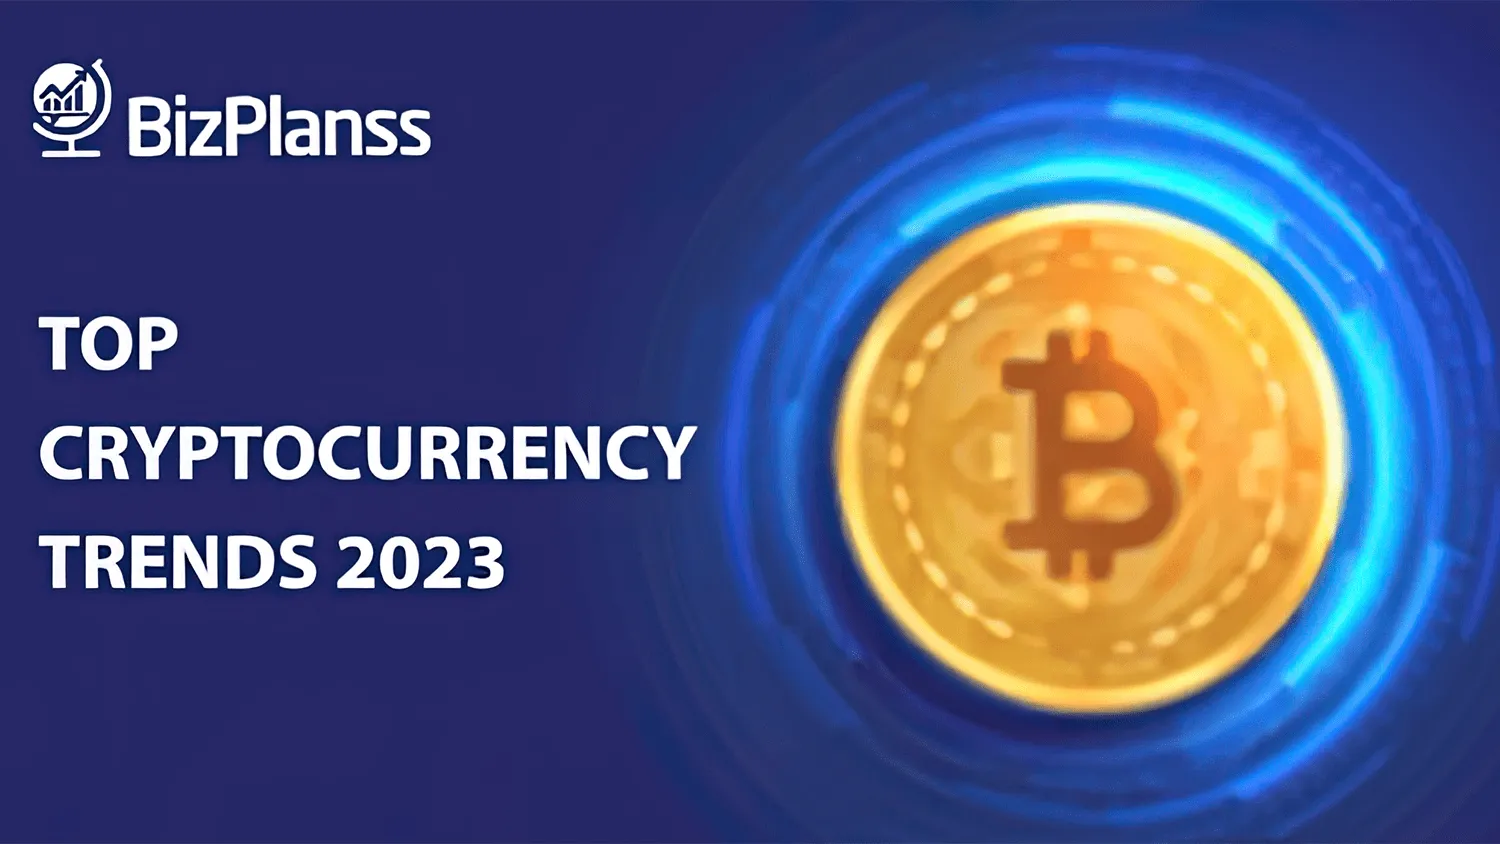 Top 6 cryptocurrency trends